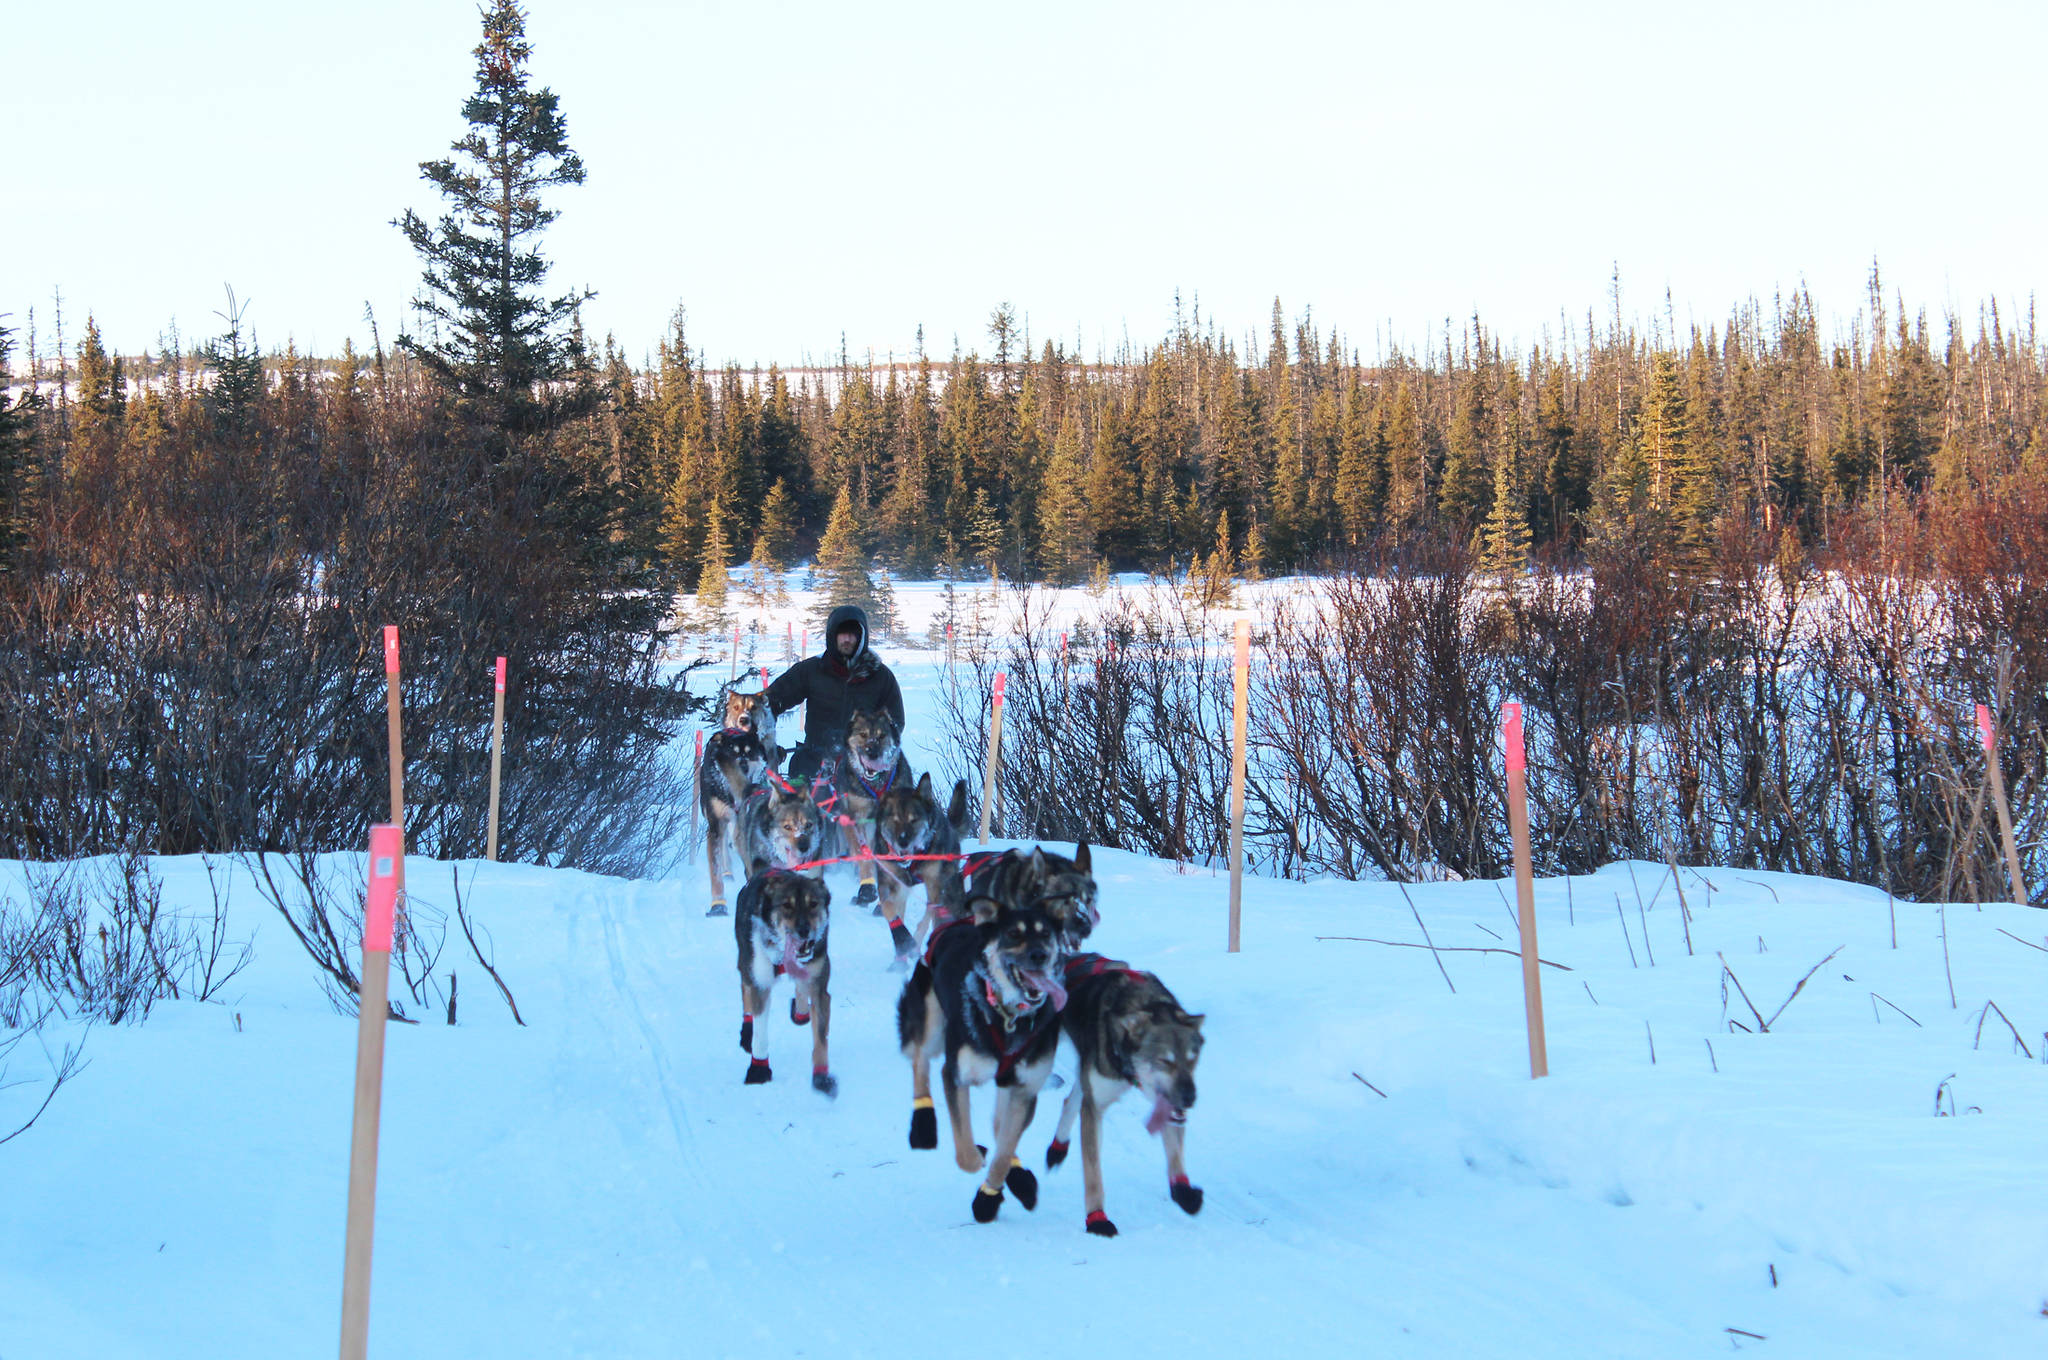 Nicolas Petit and his sled dog team pull in to the first checkpoint of the Tustumena 200 Sled Dog Race on Saturday, Jan. 27, 2018 at McNeil Canyon Elementary School near Homer, Alaska. Petit, who took second place in the T200 last year, was the first to arrive at the checkpoint. (Photo by Megan Pacer/Homer News)